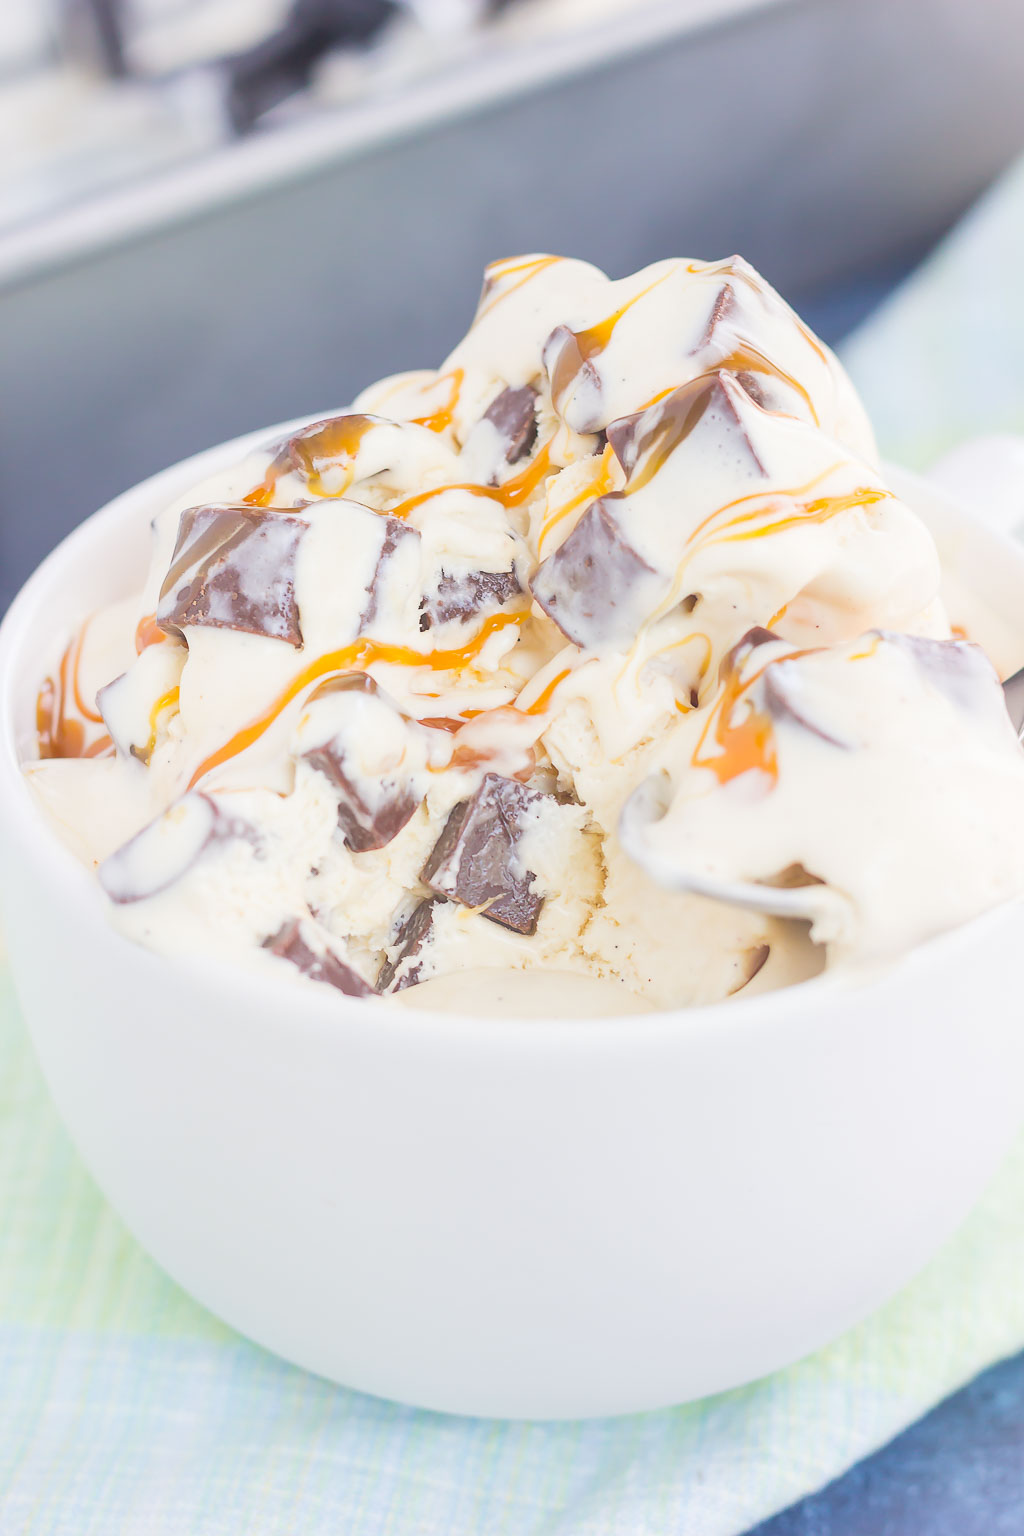 This {No-Churn} Salted Caramel Chocolate Chunk Ice Cream is a simple, must-make treat for the summer. Sweet vanilla ice cream is swirled with rich, salted caramel and loaded with chunks of chocolate. Easy to make and with no ice cream maker needed, you can have this decadent dessert ready in no time!